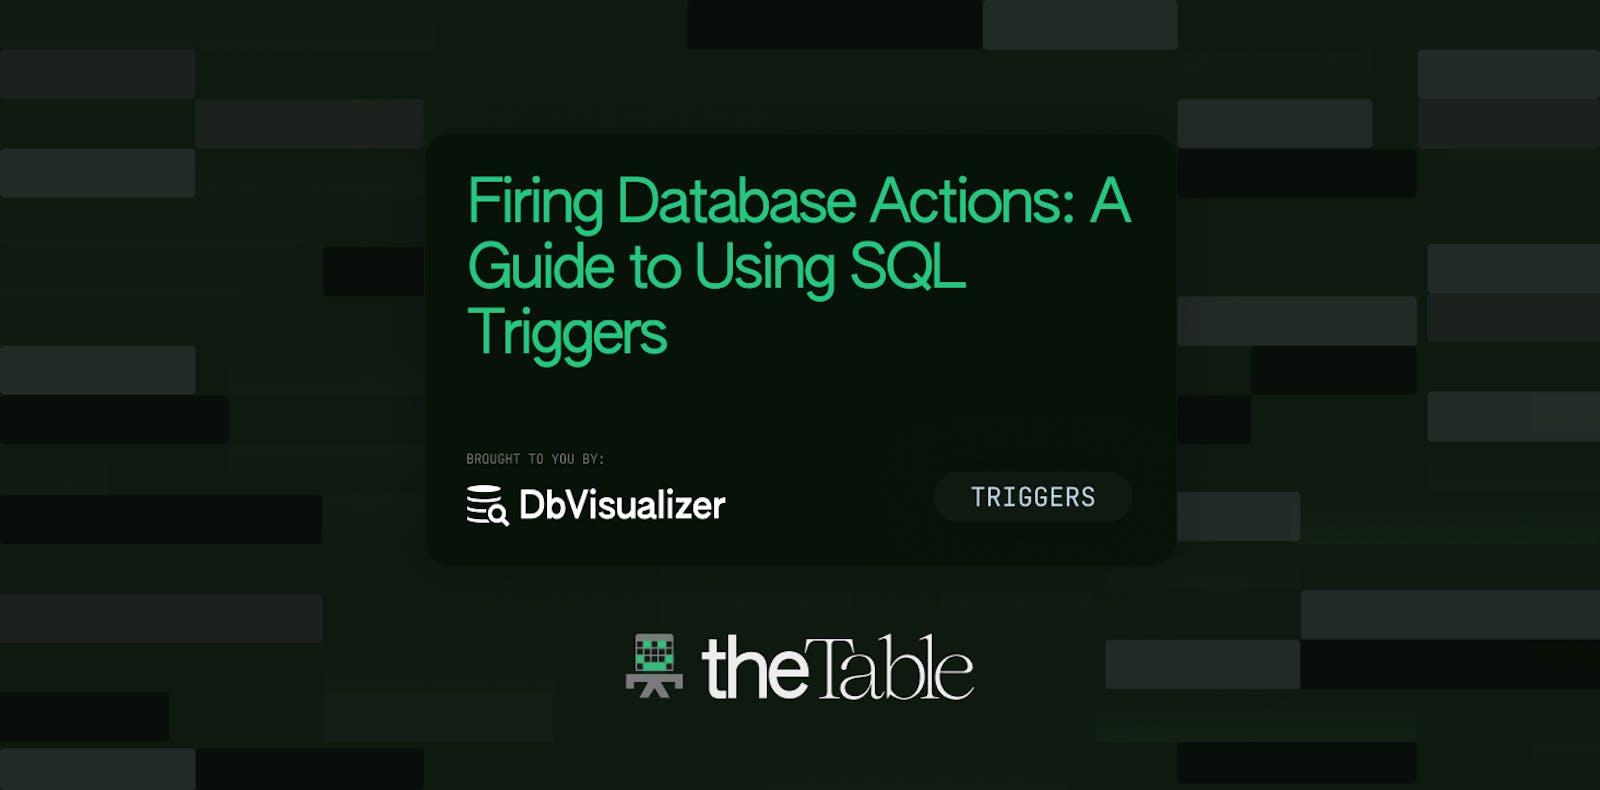 Firing Database Actions: A Guide to Using SQL Triggers with DbVisualizer